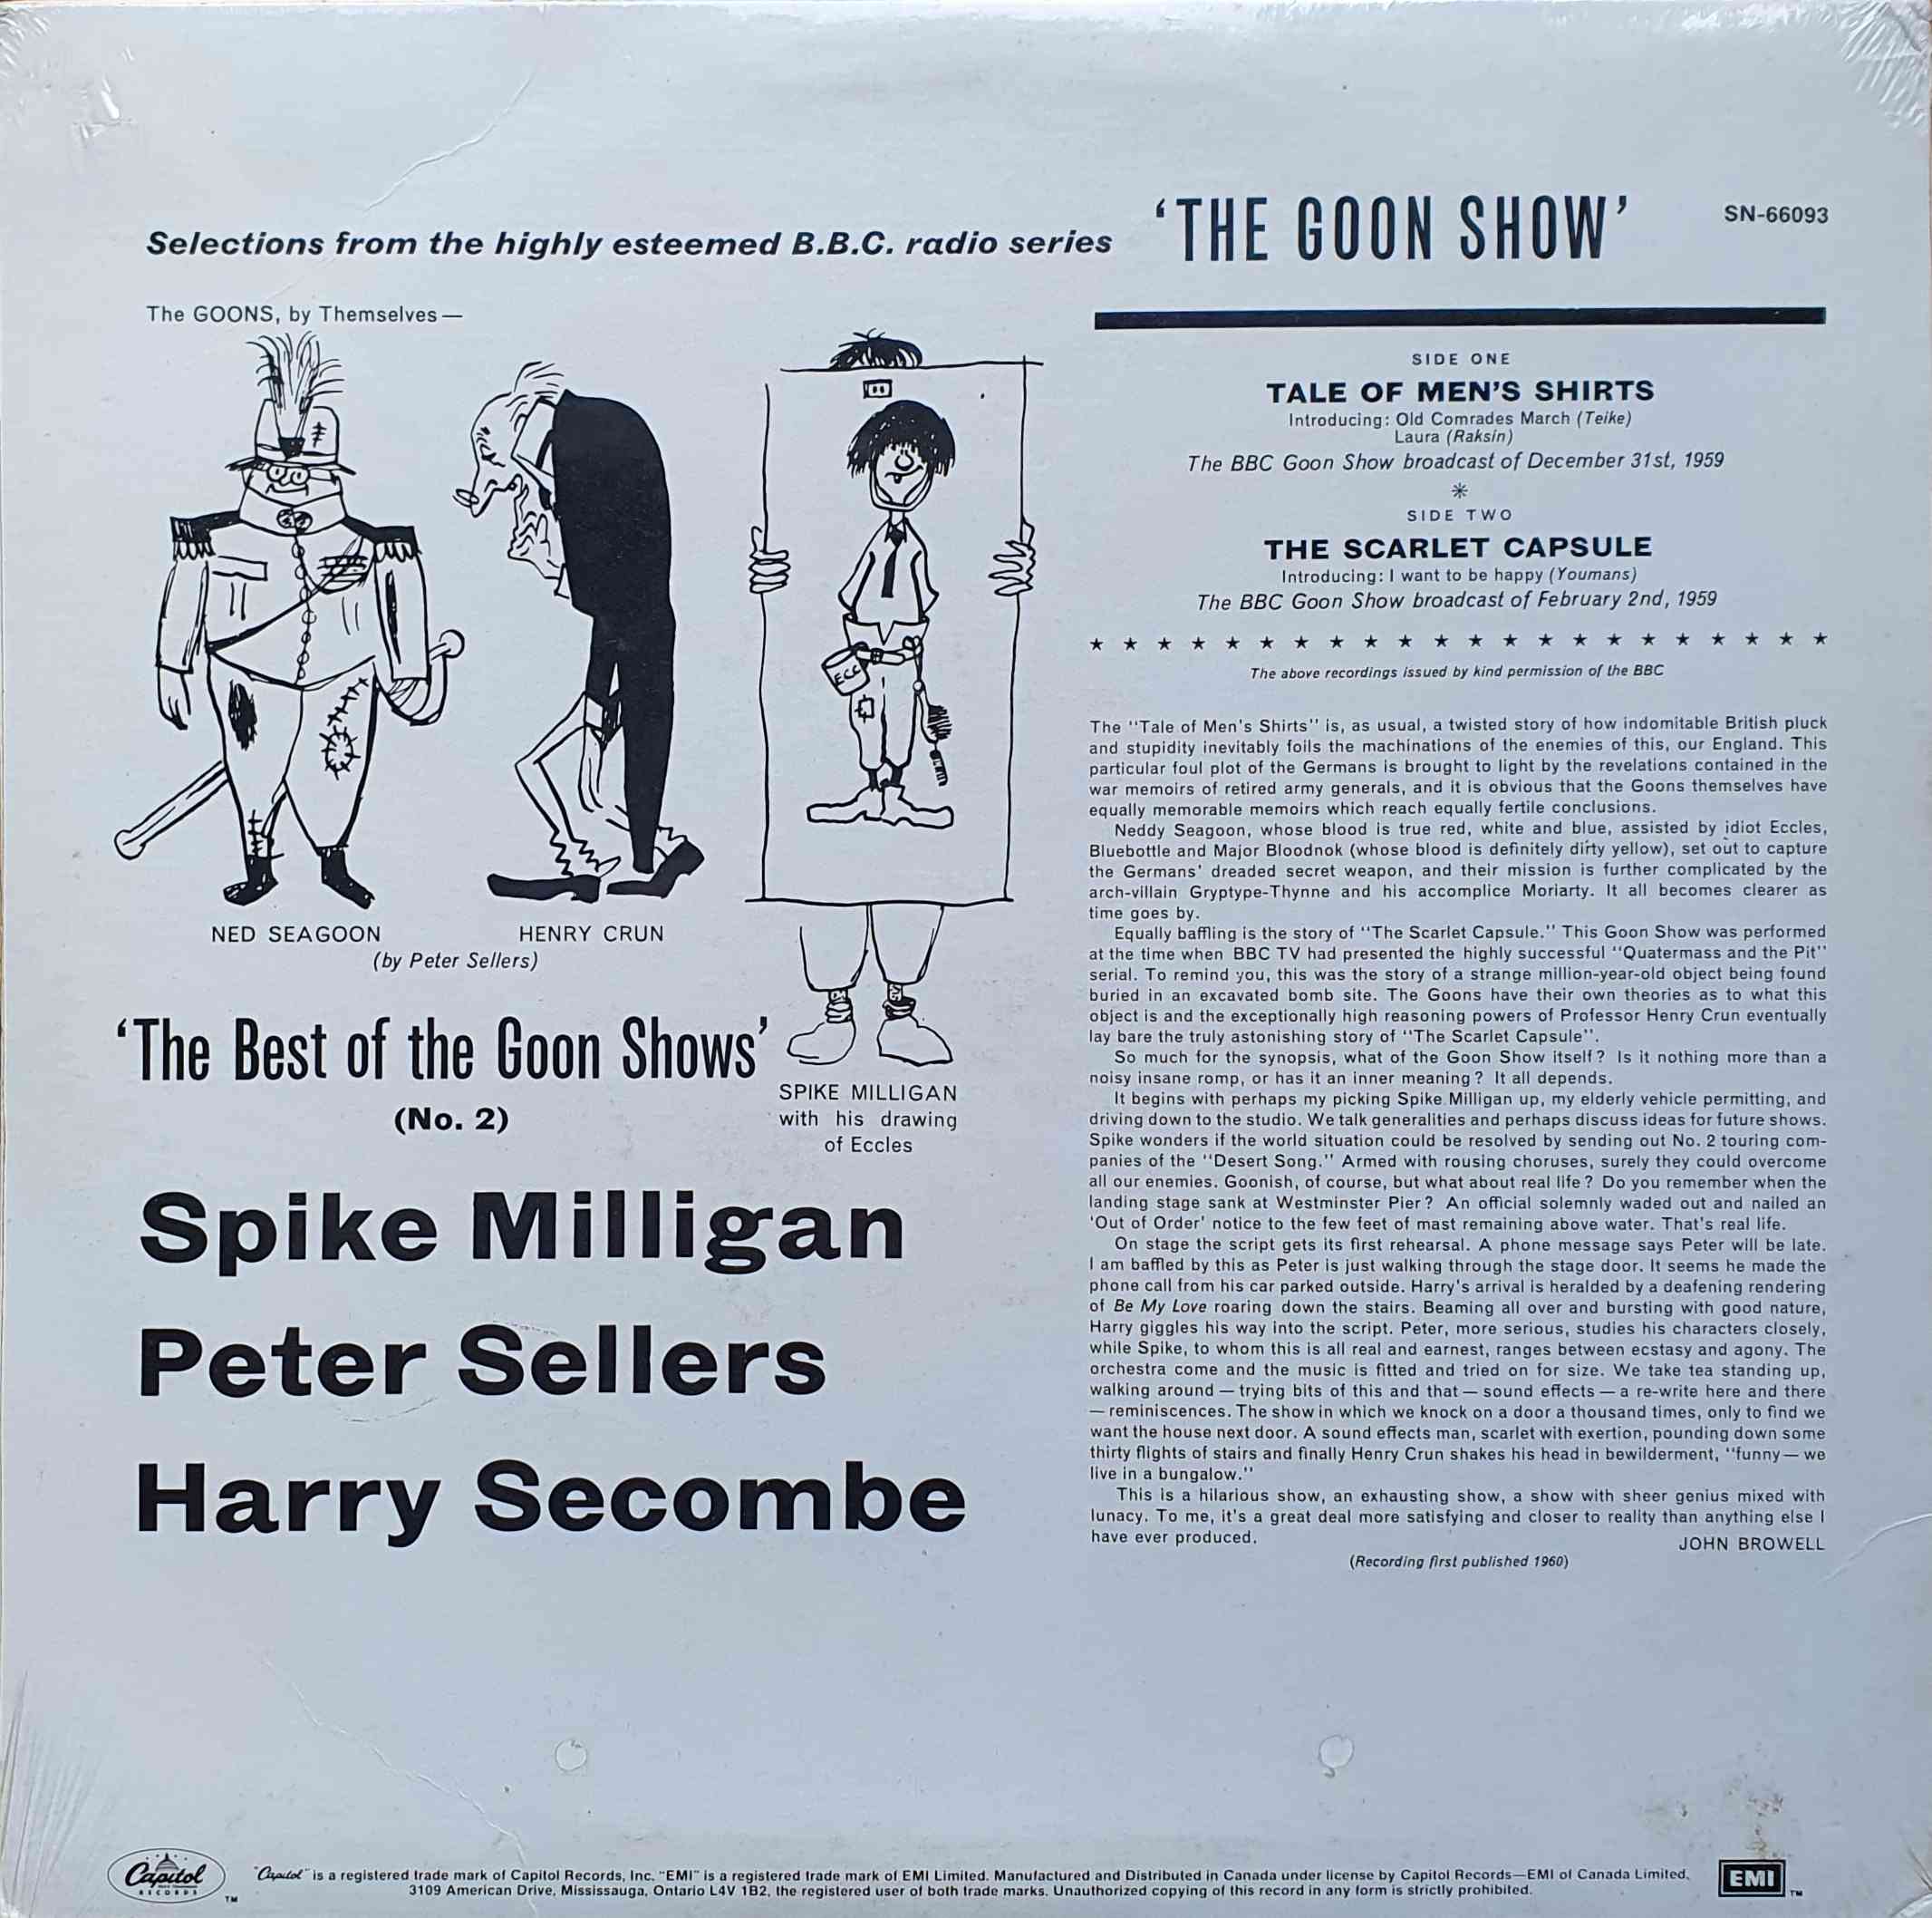 Picture of SN - 66093 The best of the Goon shows No 2 by artist Spike Milligan / Peter Sellers / Harry Secombe from the BBC records and Tapes library